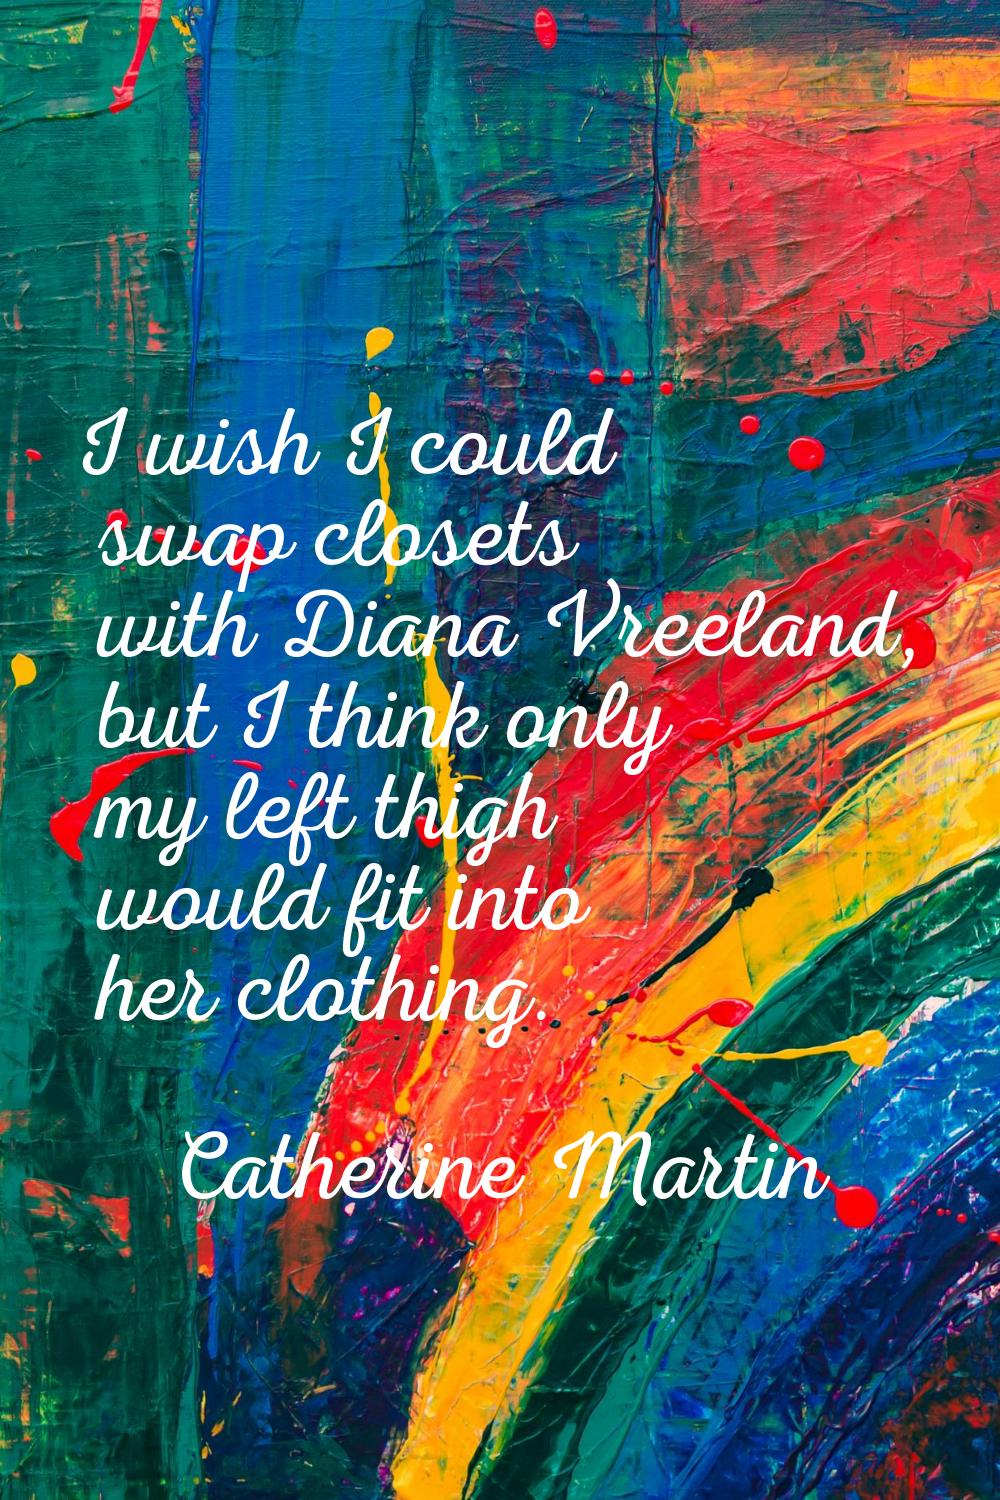 I wish I could swap closets with Diana Vreeland, but I think only my left thigh would fit into her 